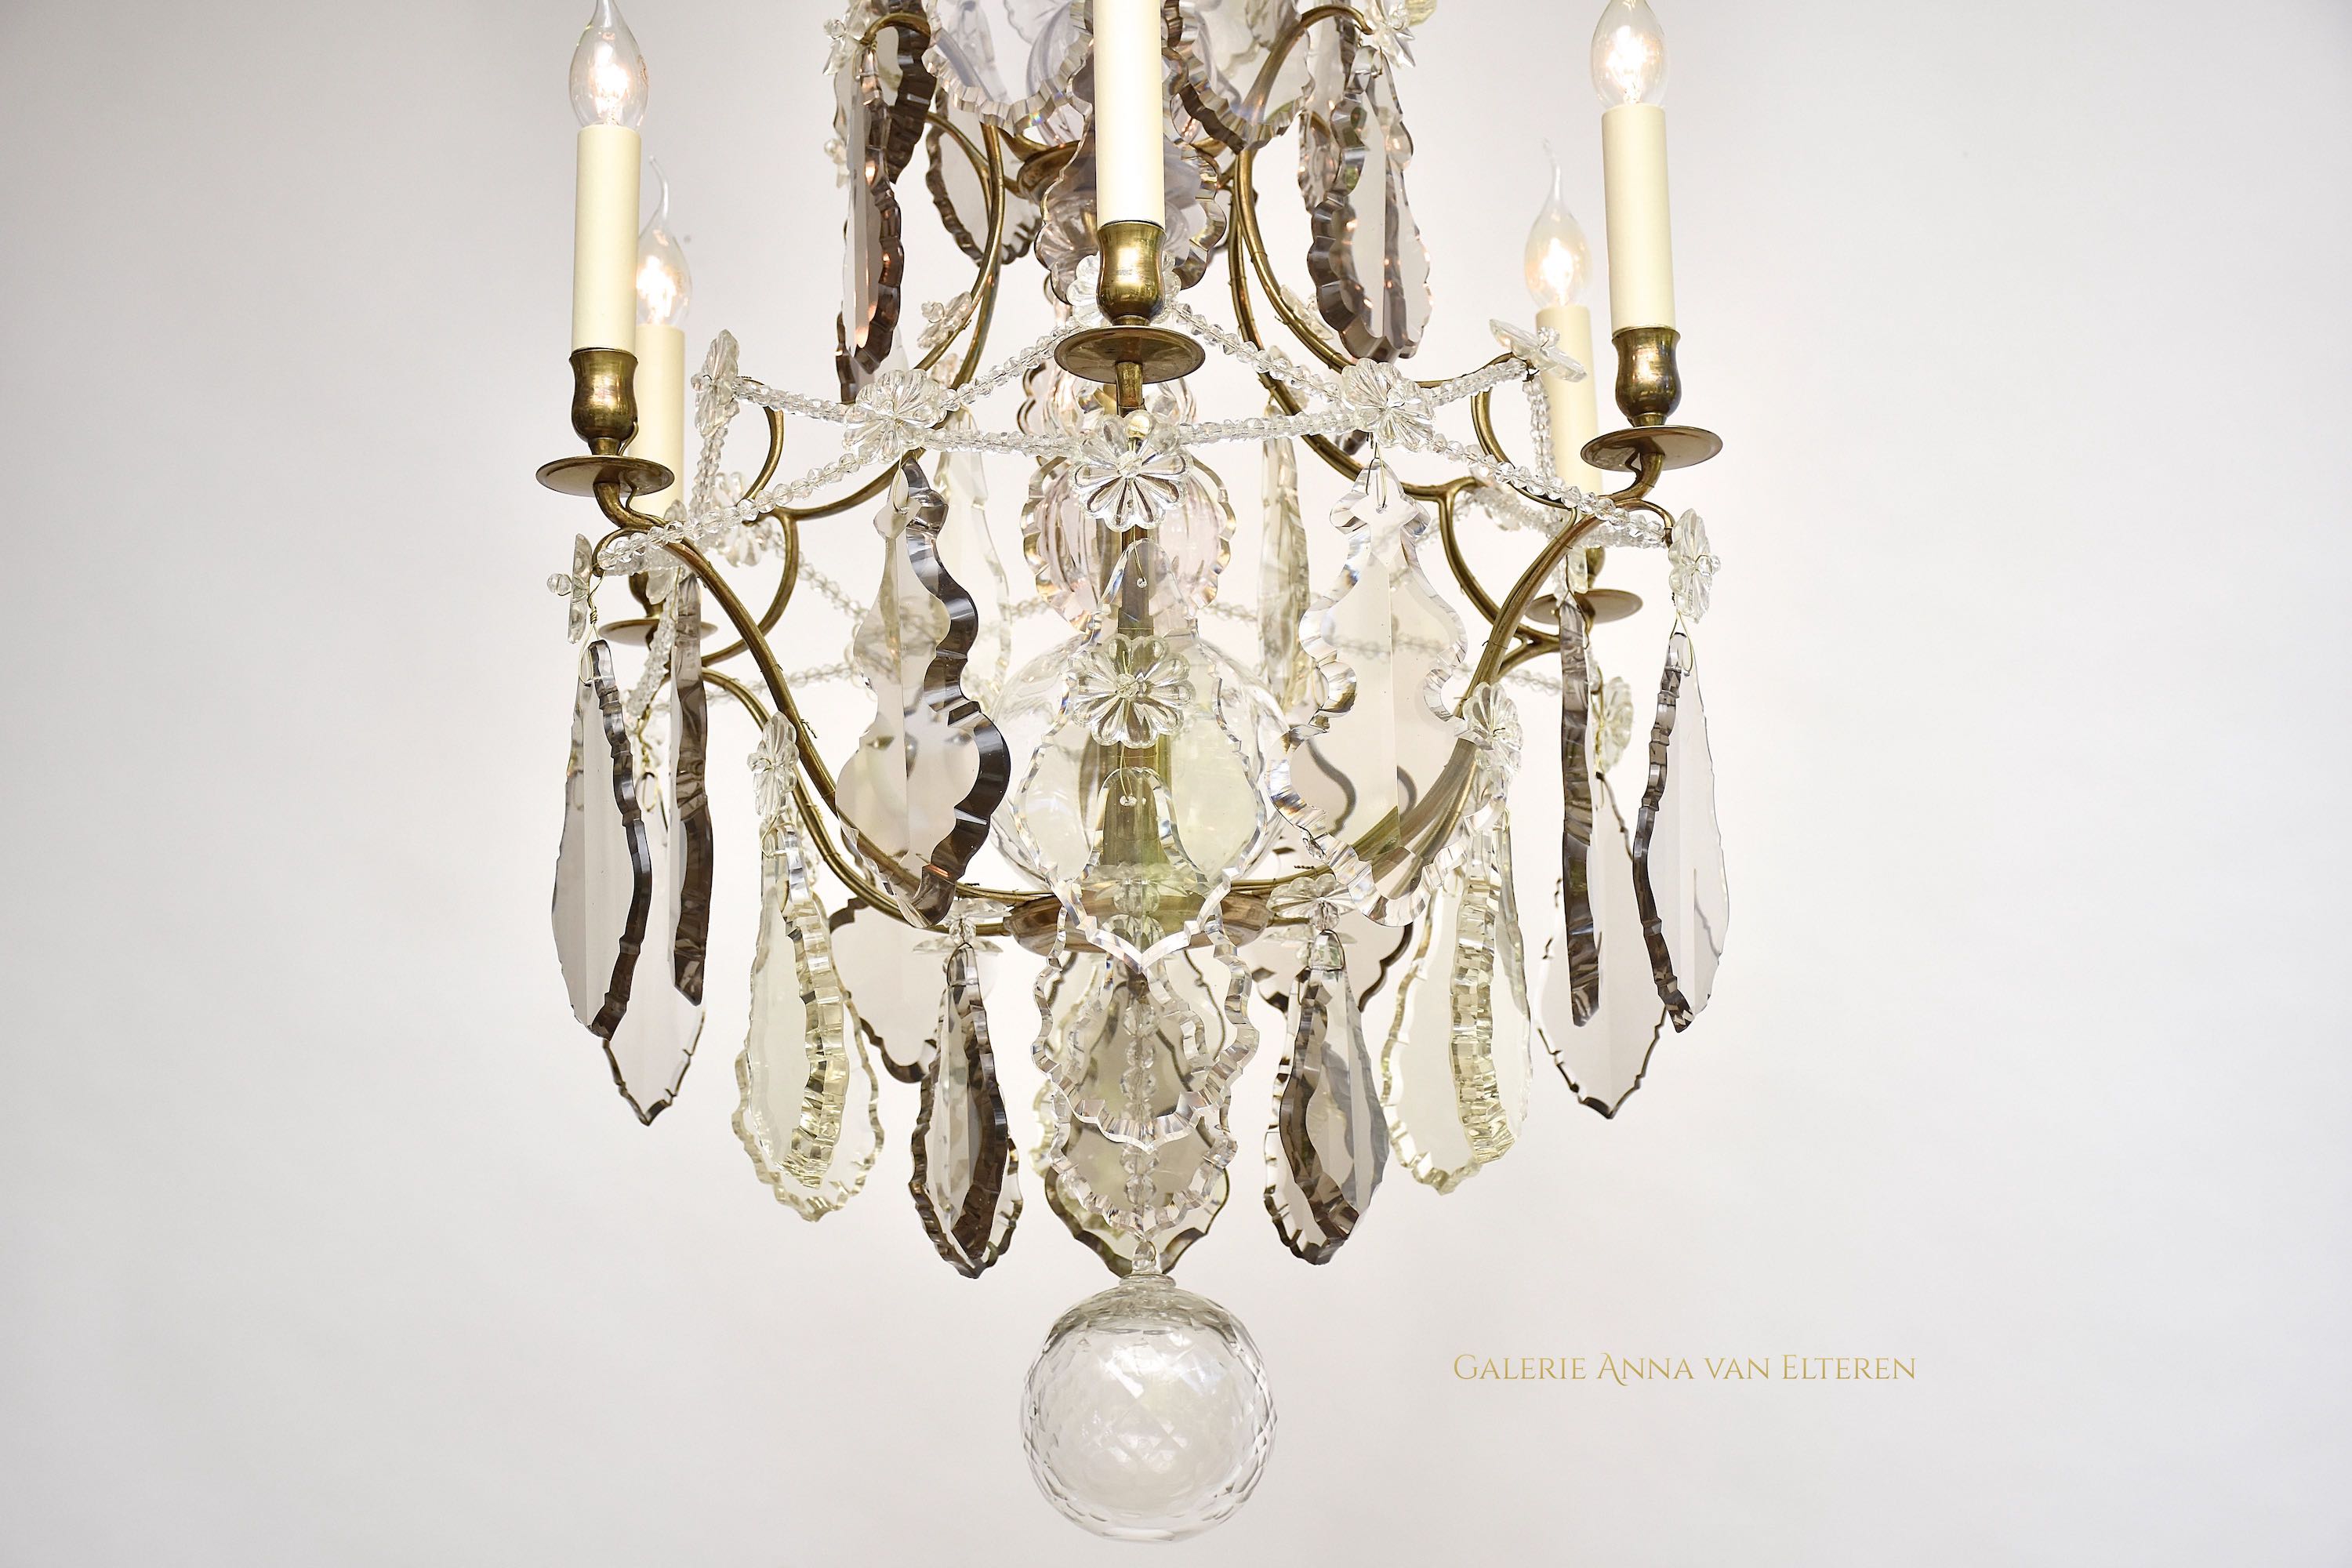 Antique crystal chandelier in the style of Rococo